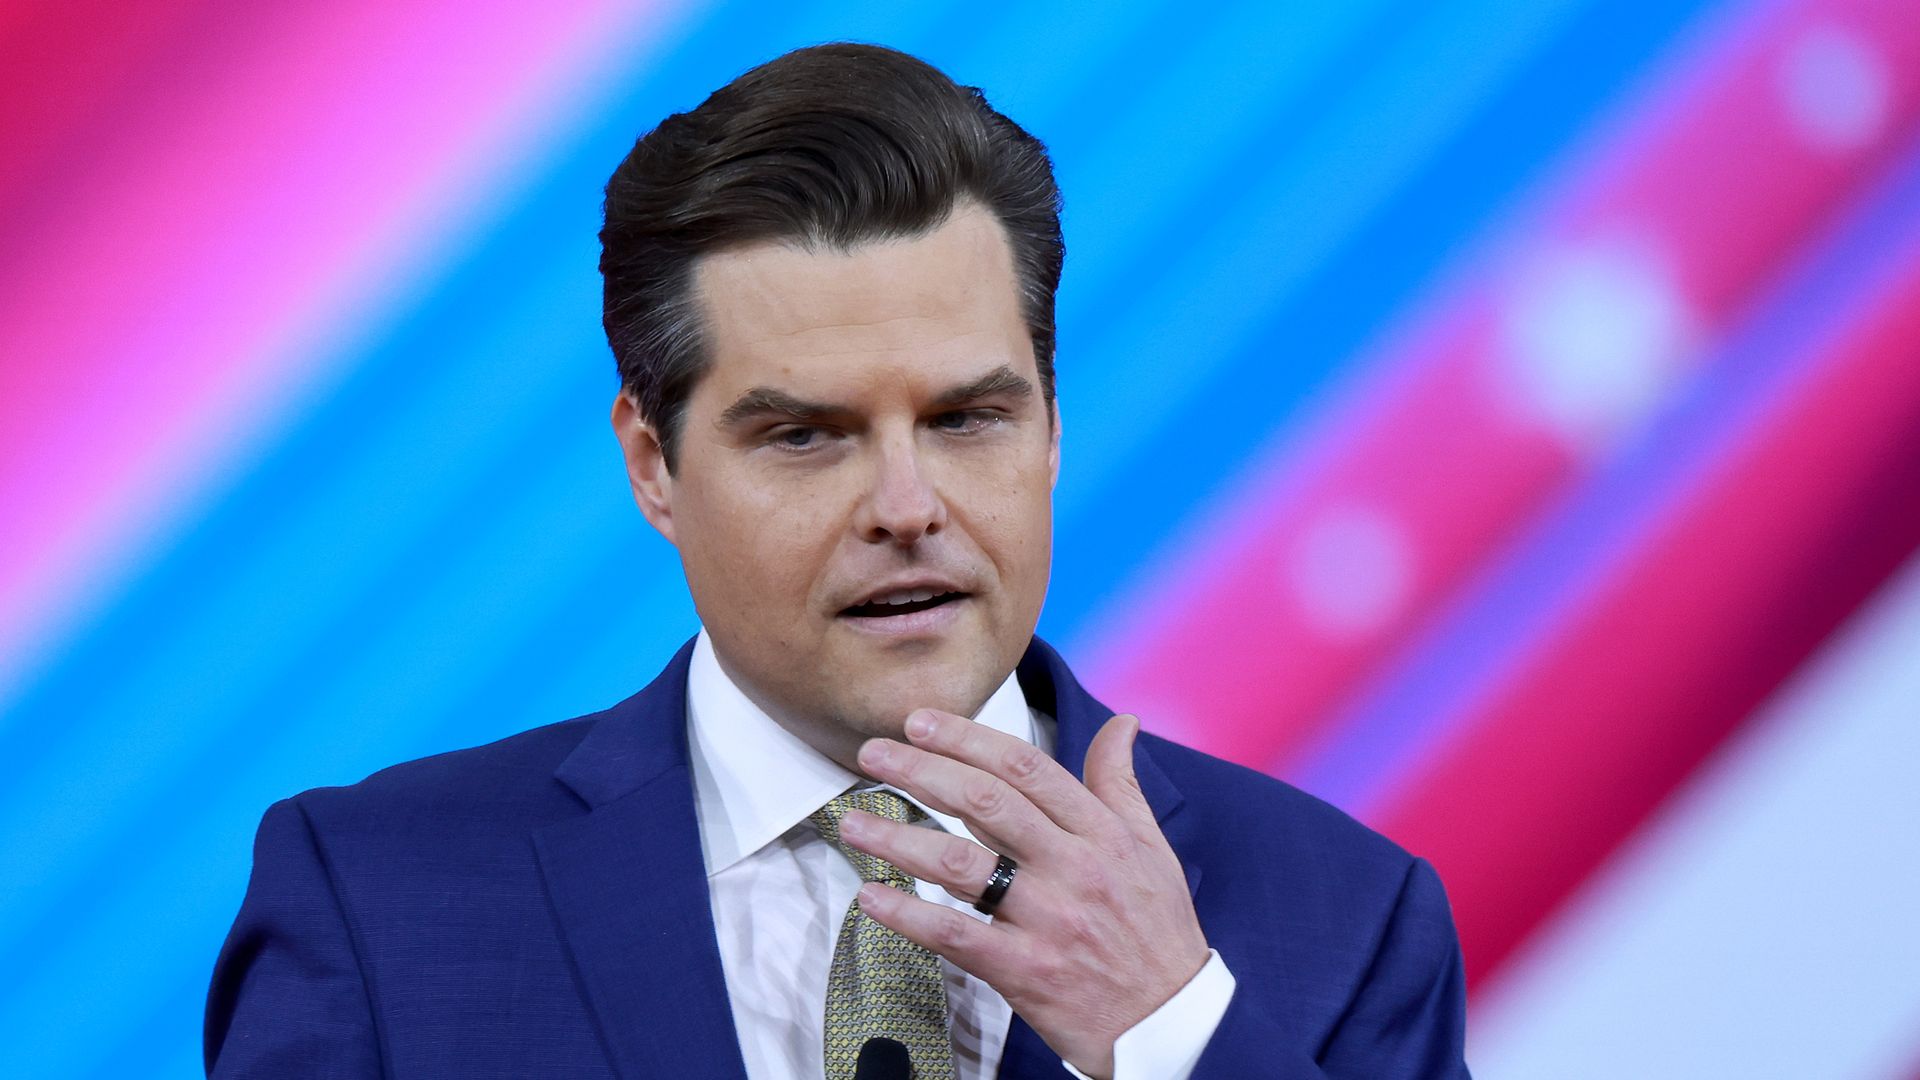 Rep. Matt Gaetz speaks during the Conservative Political Action Conference on February 26, 2022 in Orlando, Florida